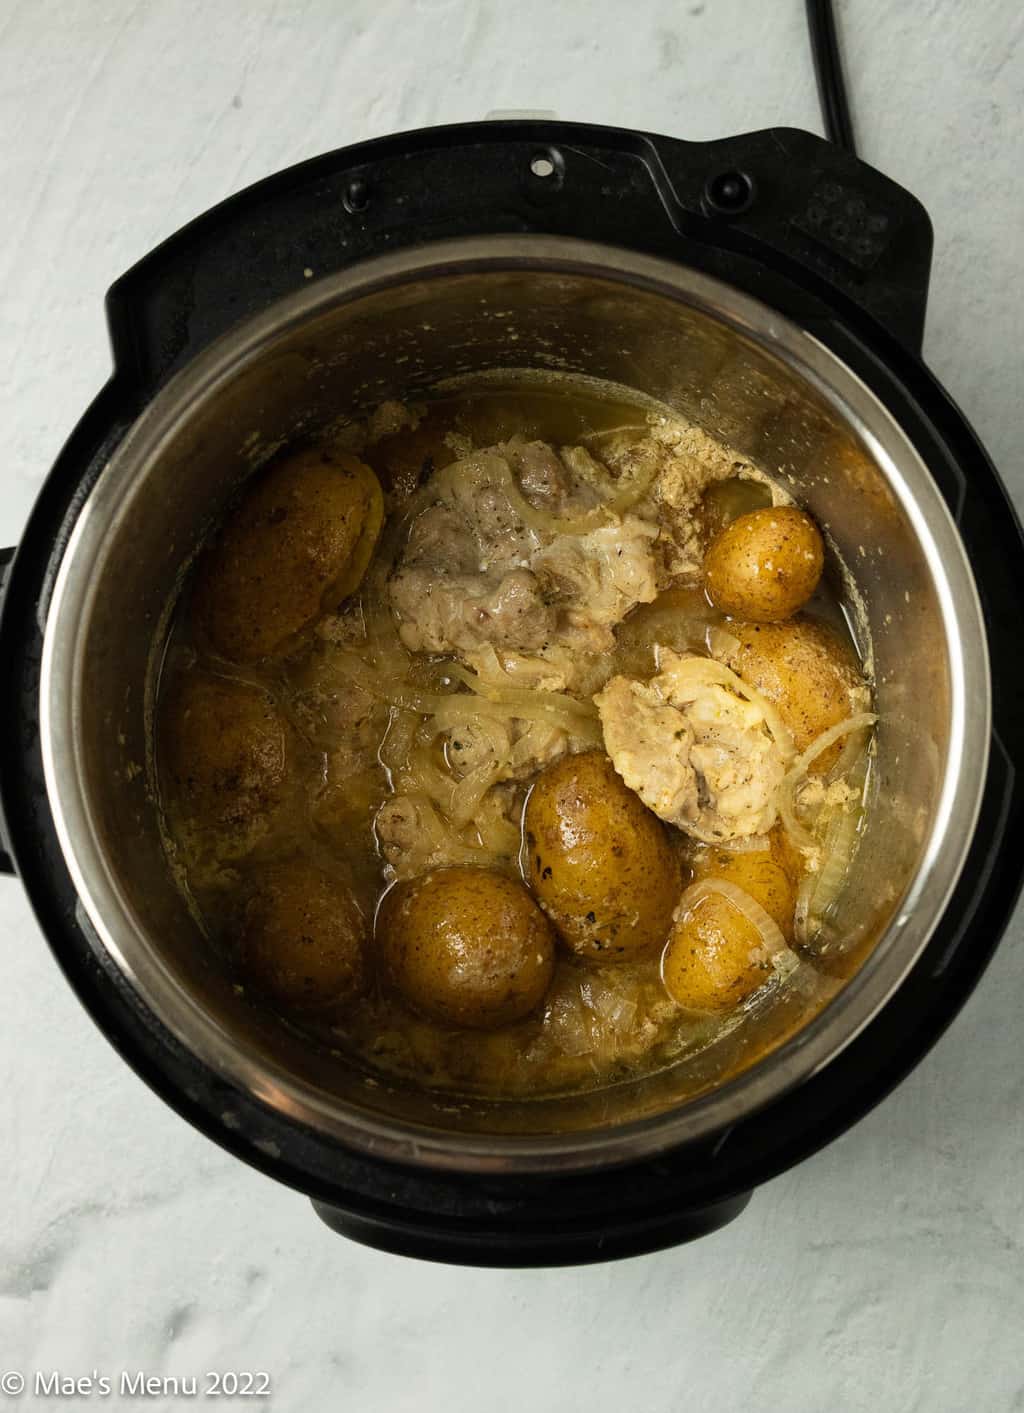 An overhead shot of a Instant pot full of chicken and potatoes.